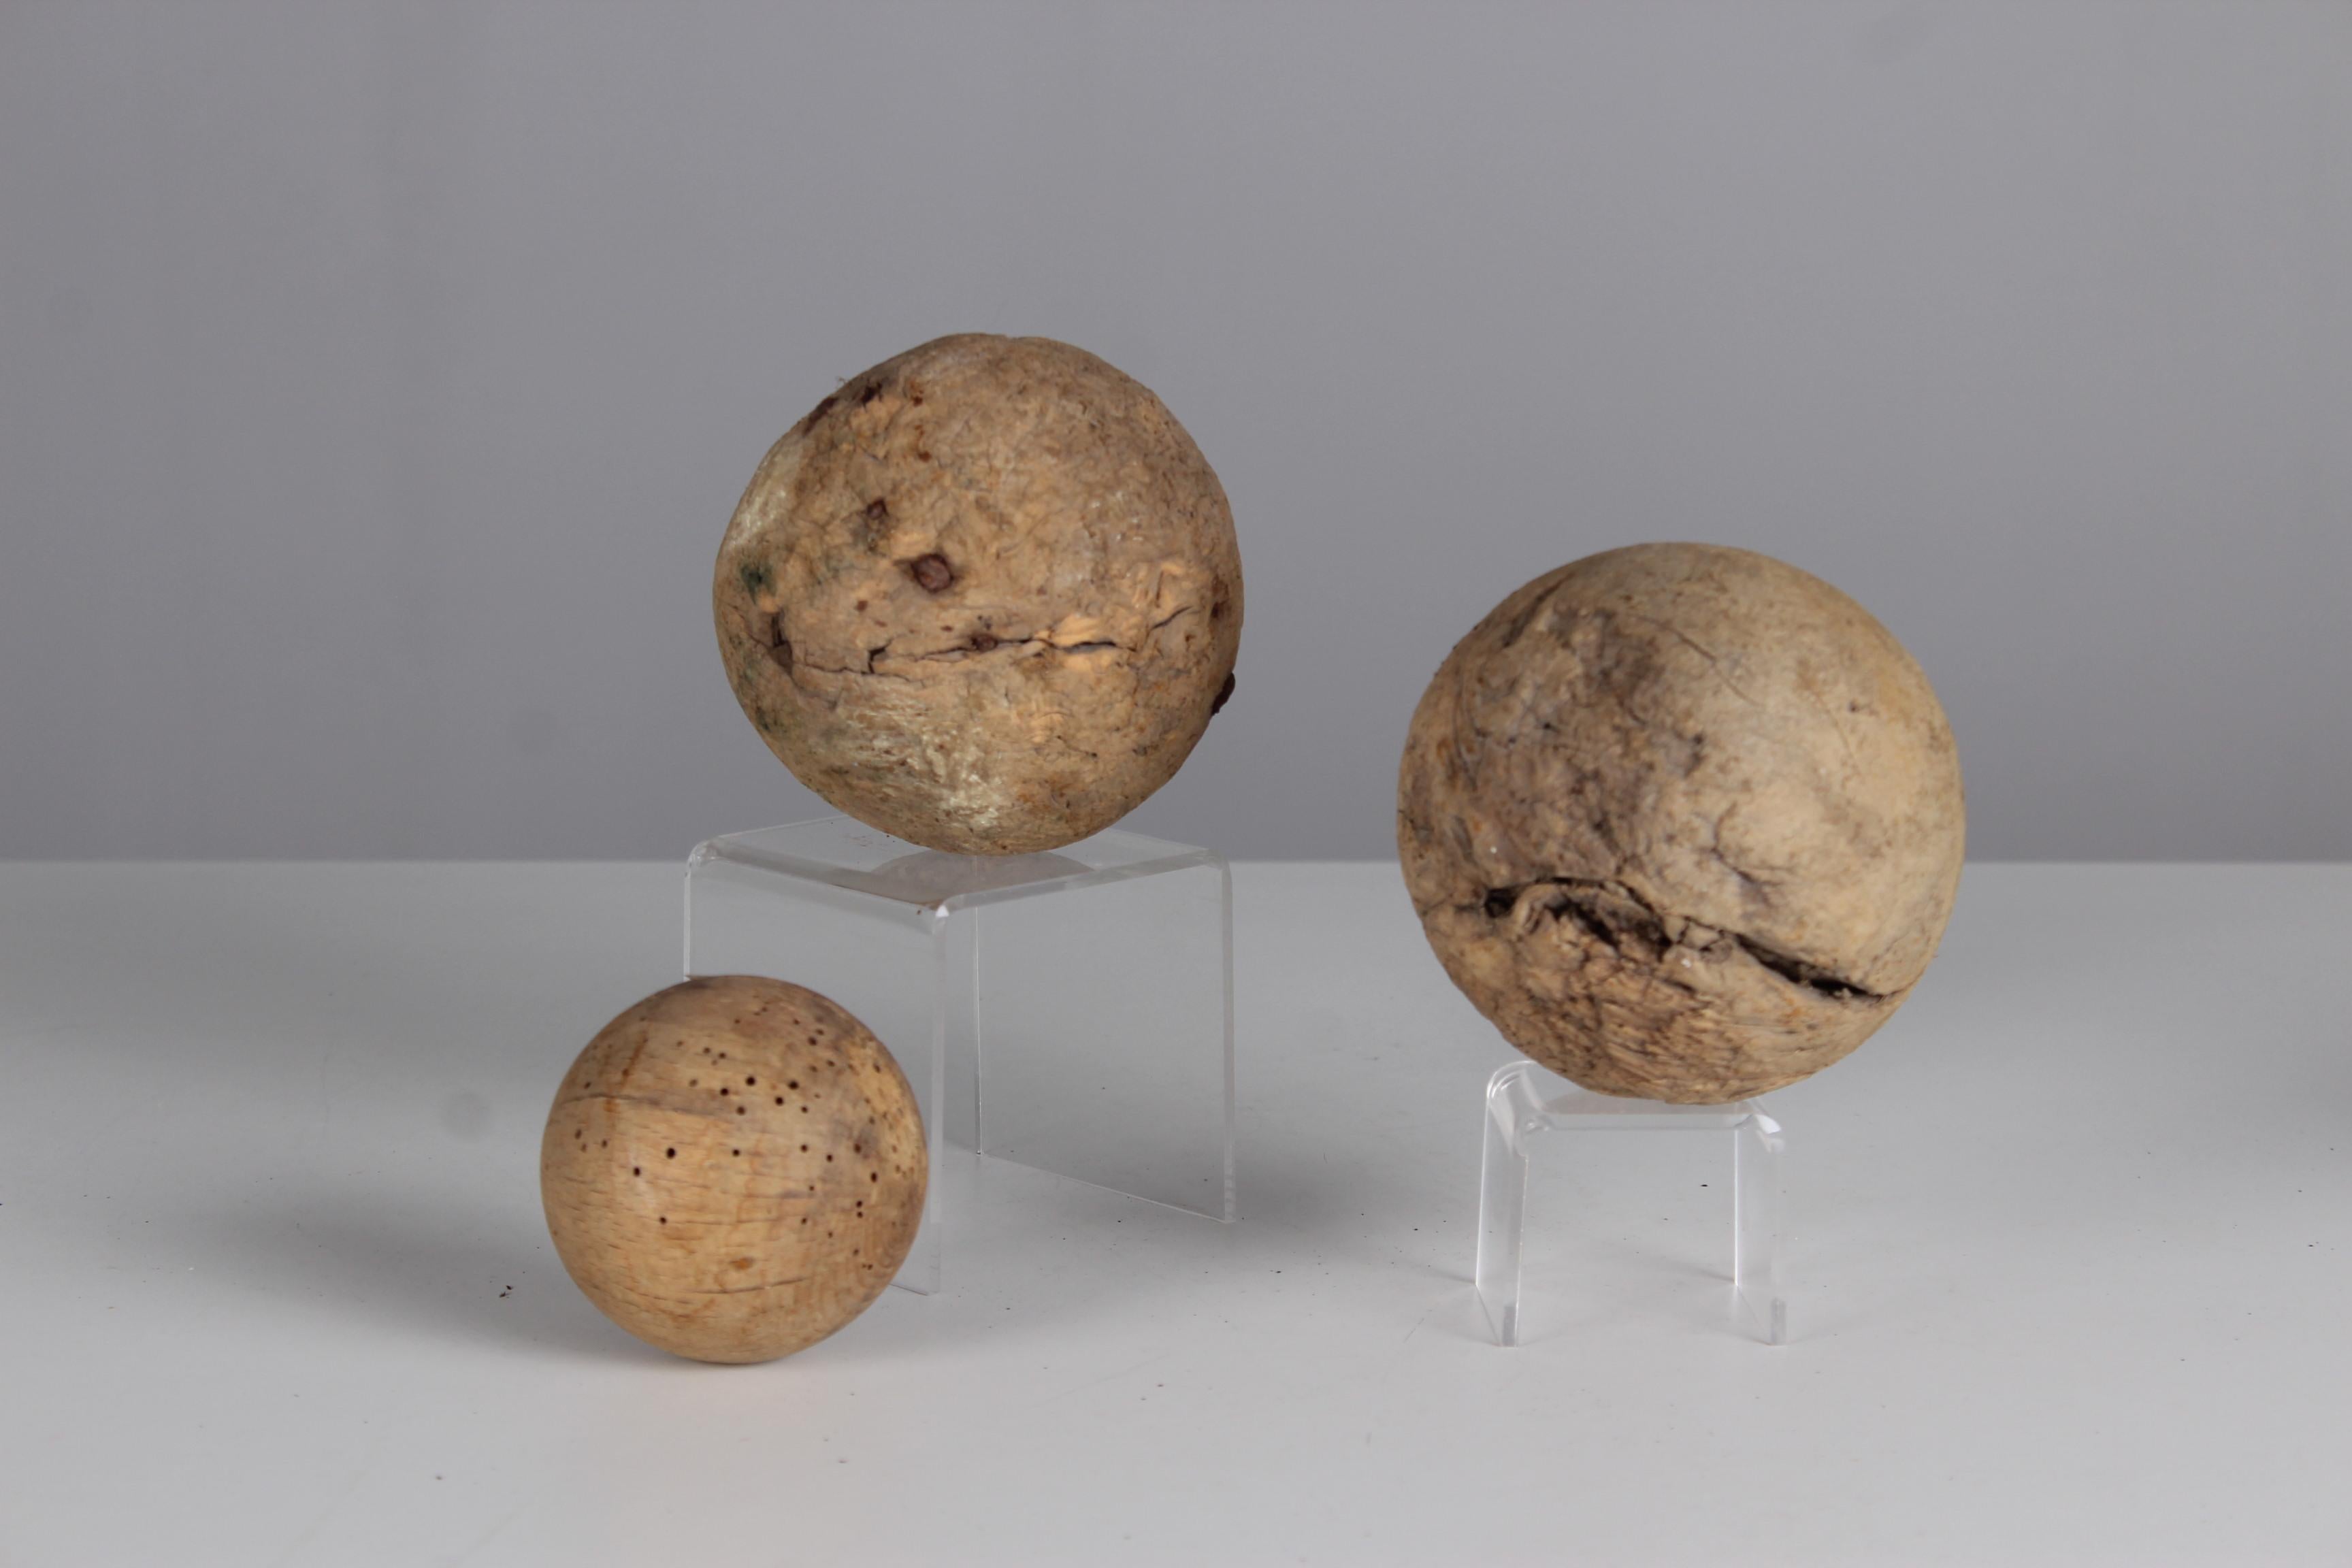 Beautiful, unique Boule set of two Boule balls and one target ball, France, late 19th century.

In the 19th century, the manufacture of boule balls underwent significant development in France as the game of boules, particularly the pétanque variant,